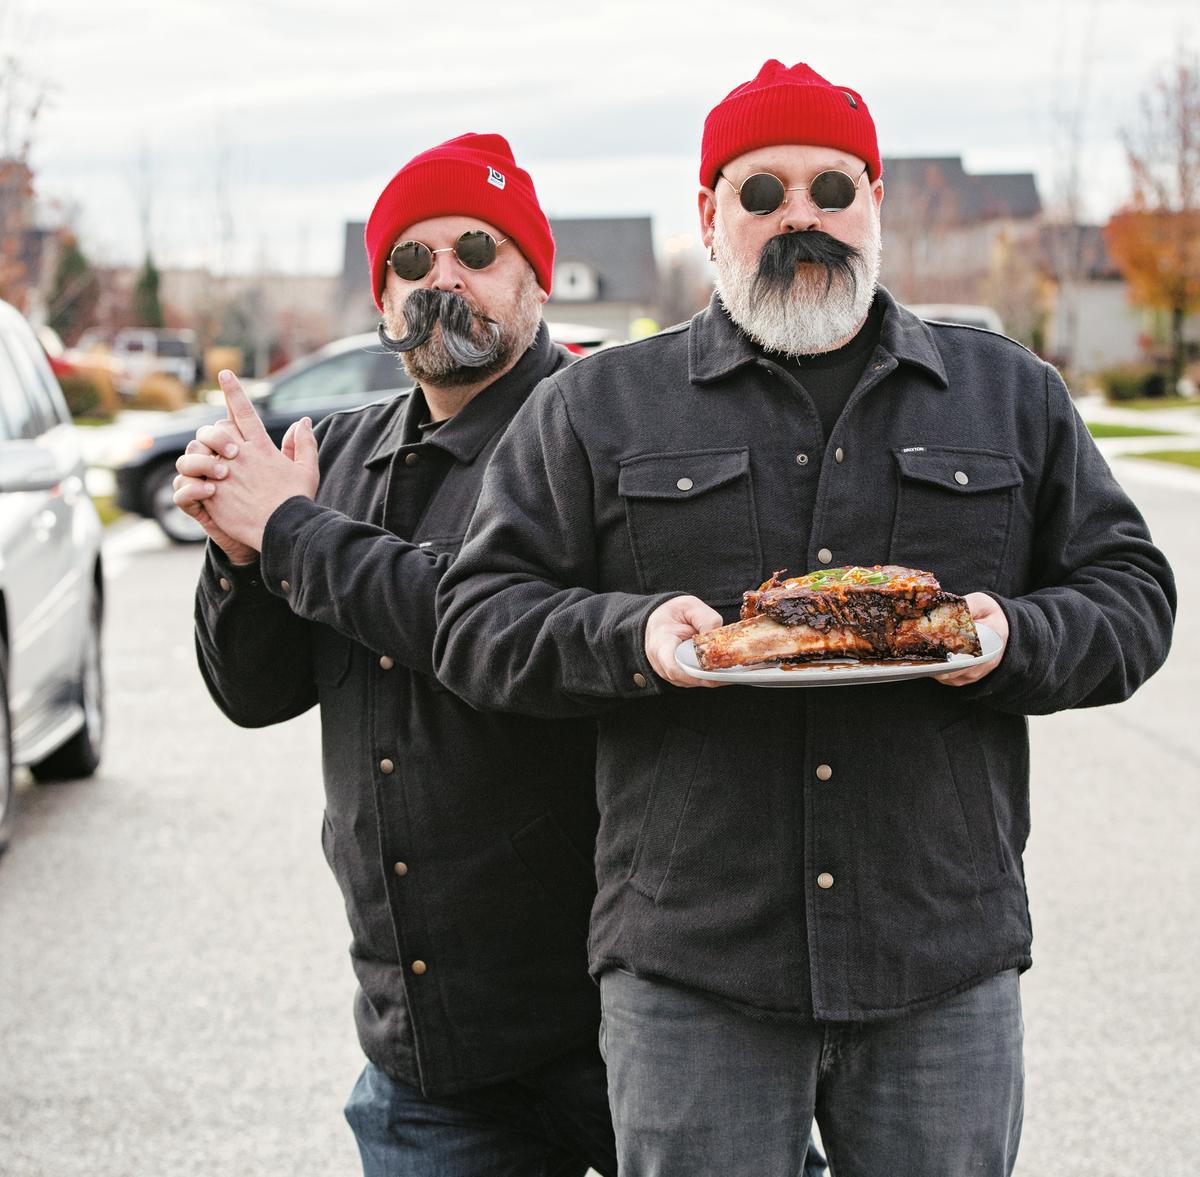 Mark Anderson (L) and Ryan Fey, The Grill Dads, are longtime friends who turned their love for grilling into culinary stardom. Among their smoke-kissed creations are internationally inspired dishes, such as their take on Korean BBQ beef ribs (featured in the "International Men of Mystery" chapter of their cookbook). (Ken Goodman)